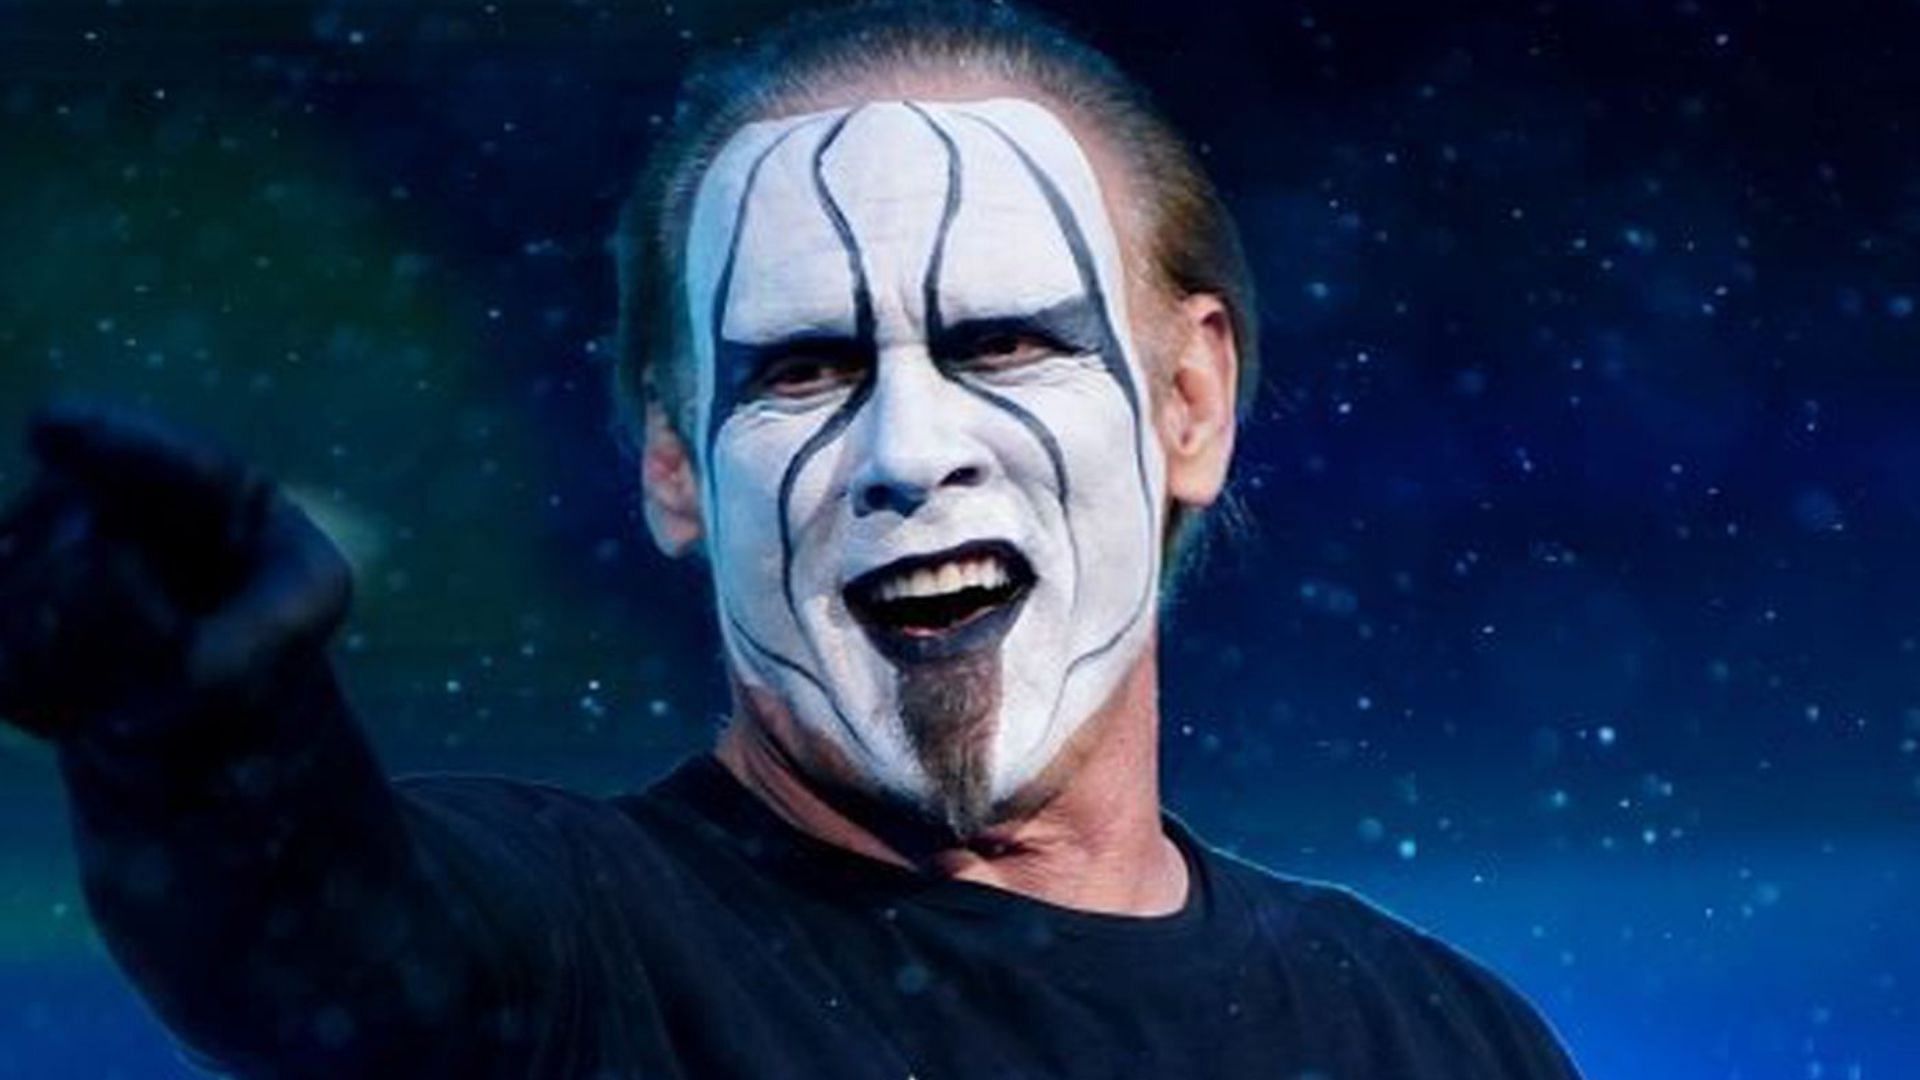 Sting had apparently been a prankster backstage